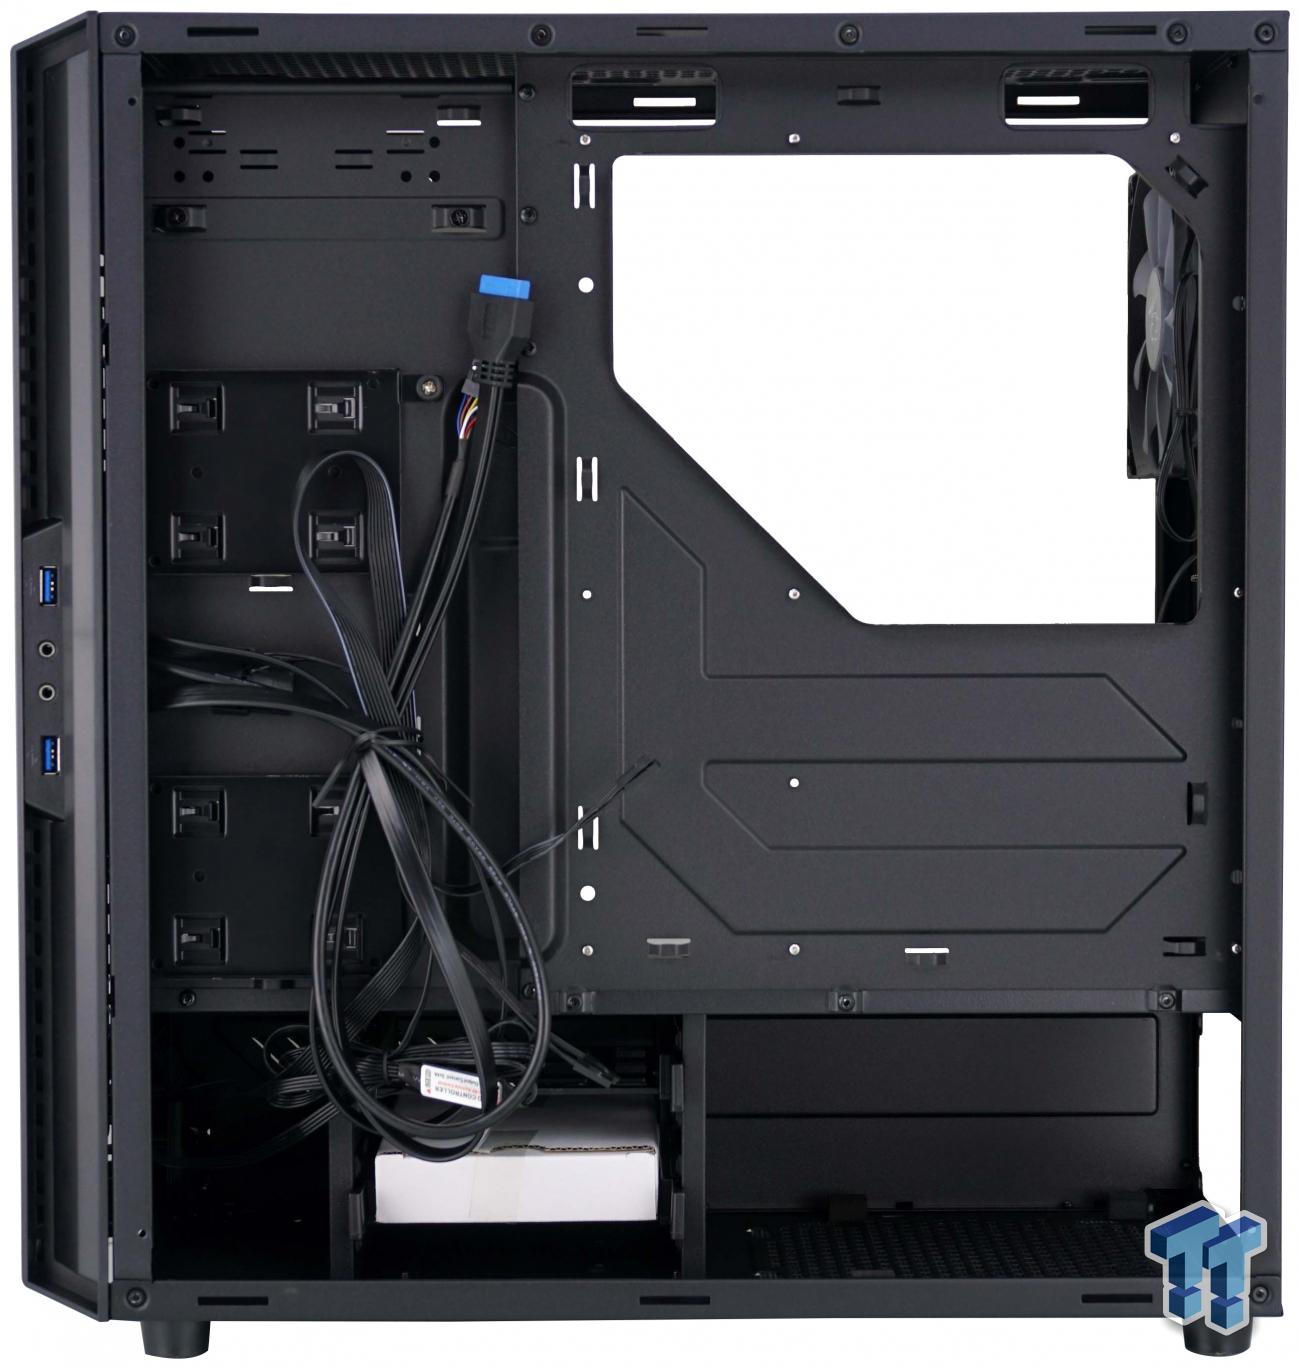 8200_23_raidmax-alpha-mid-tower-chassis-review_full.jpg